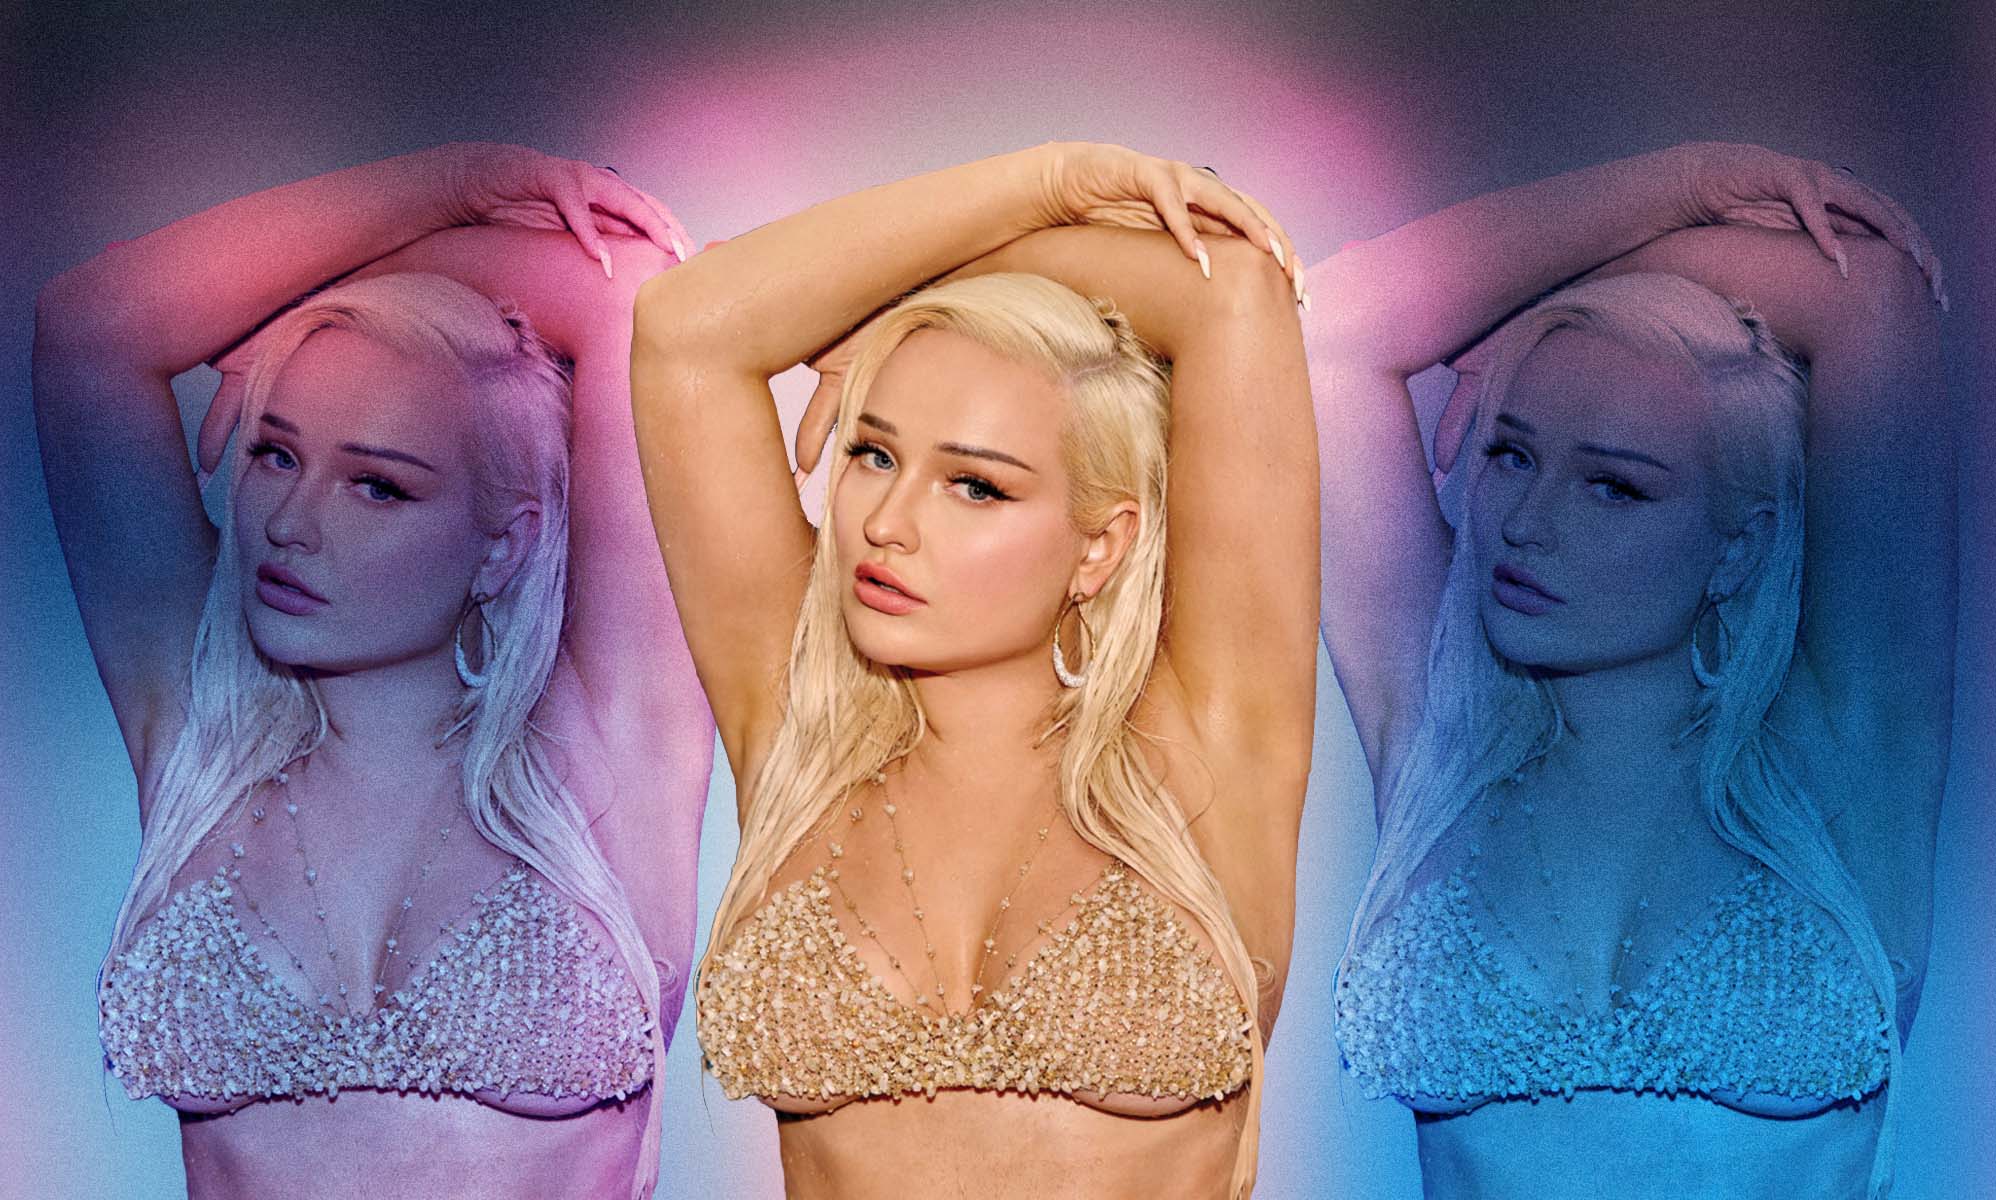 Kim Petras on her Sports Illustrated cover 'Huge confidence boost'